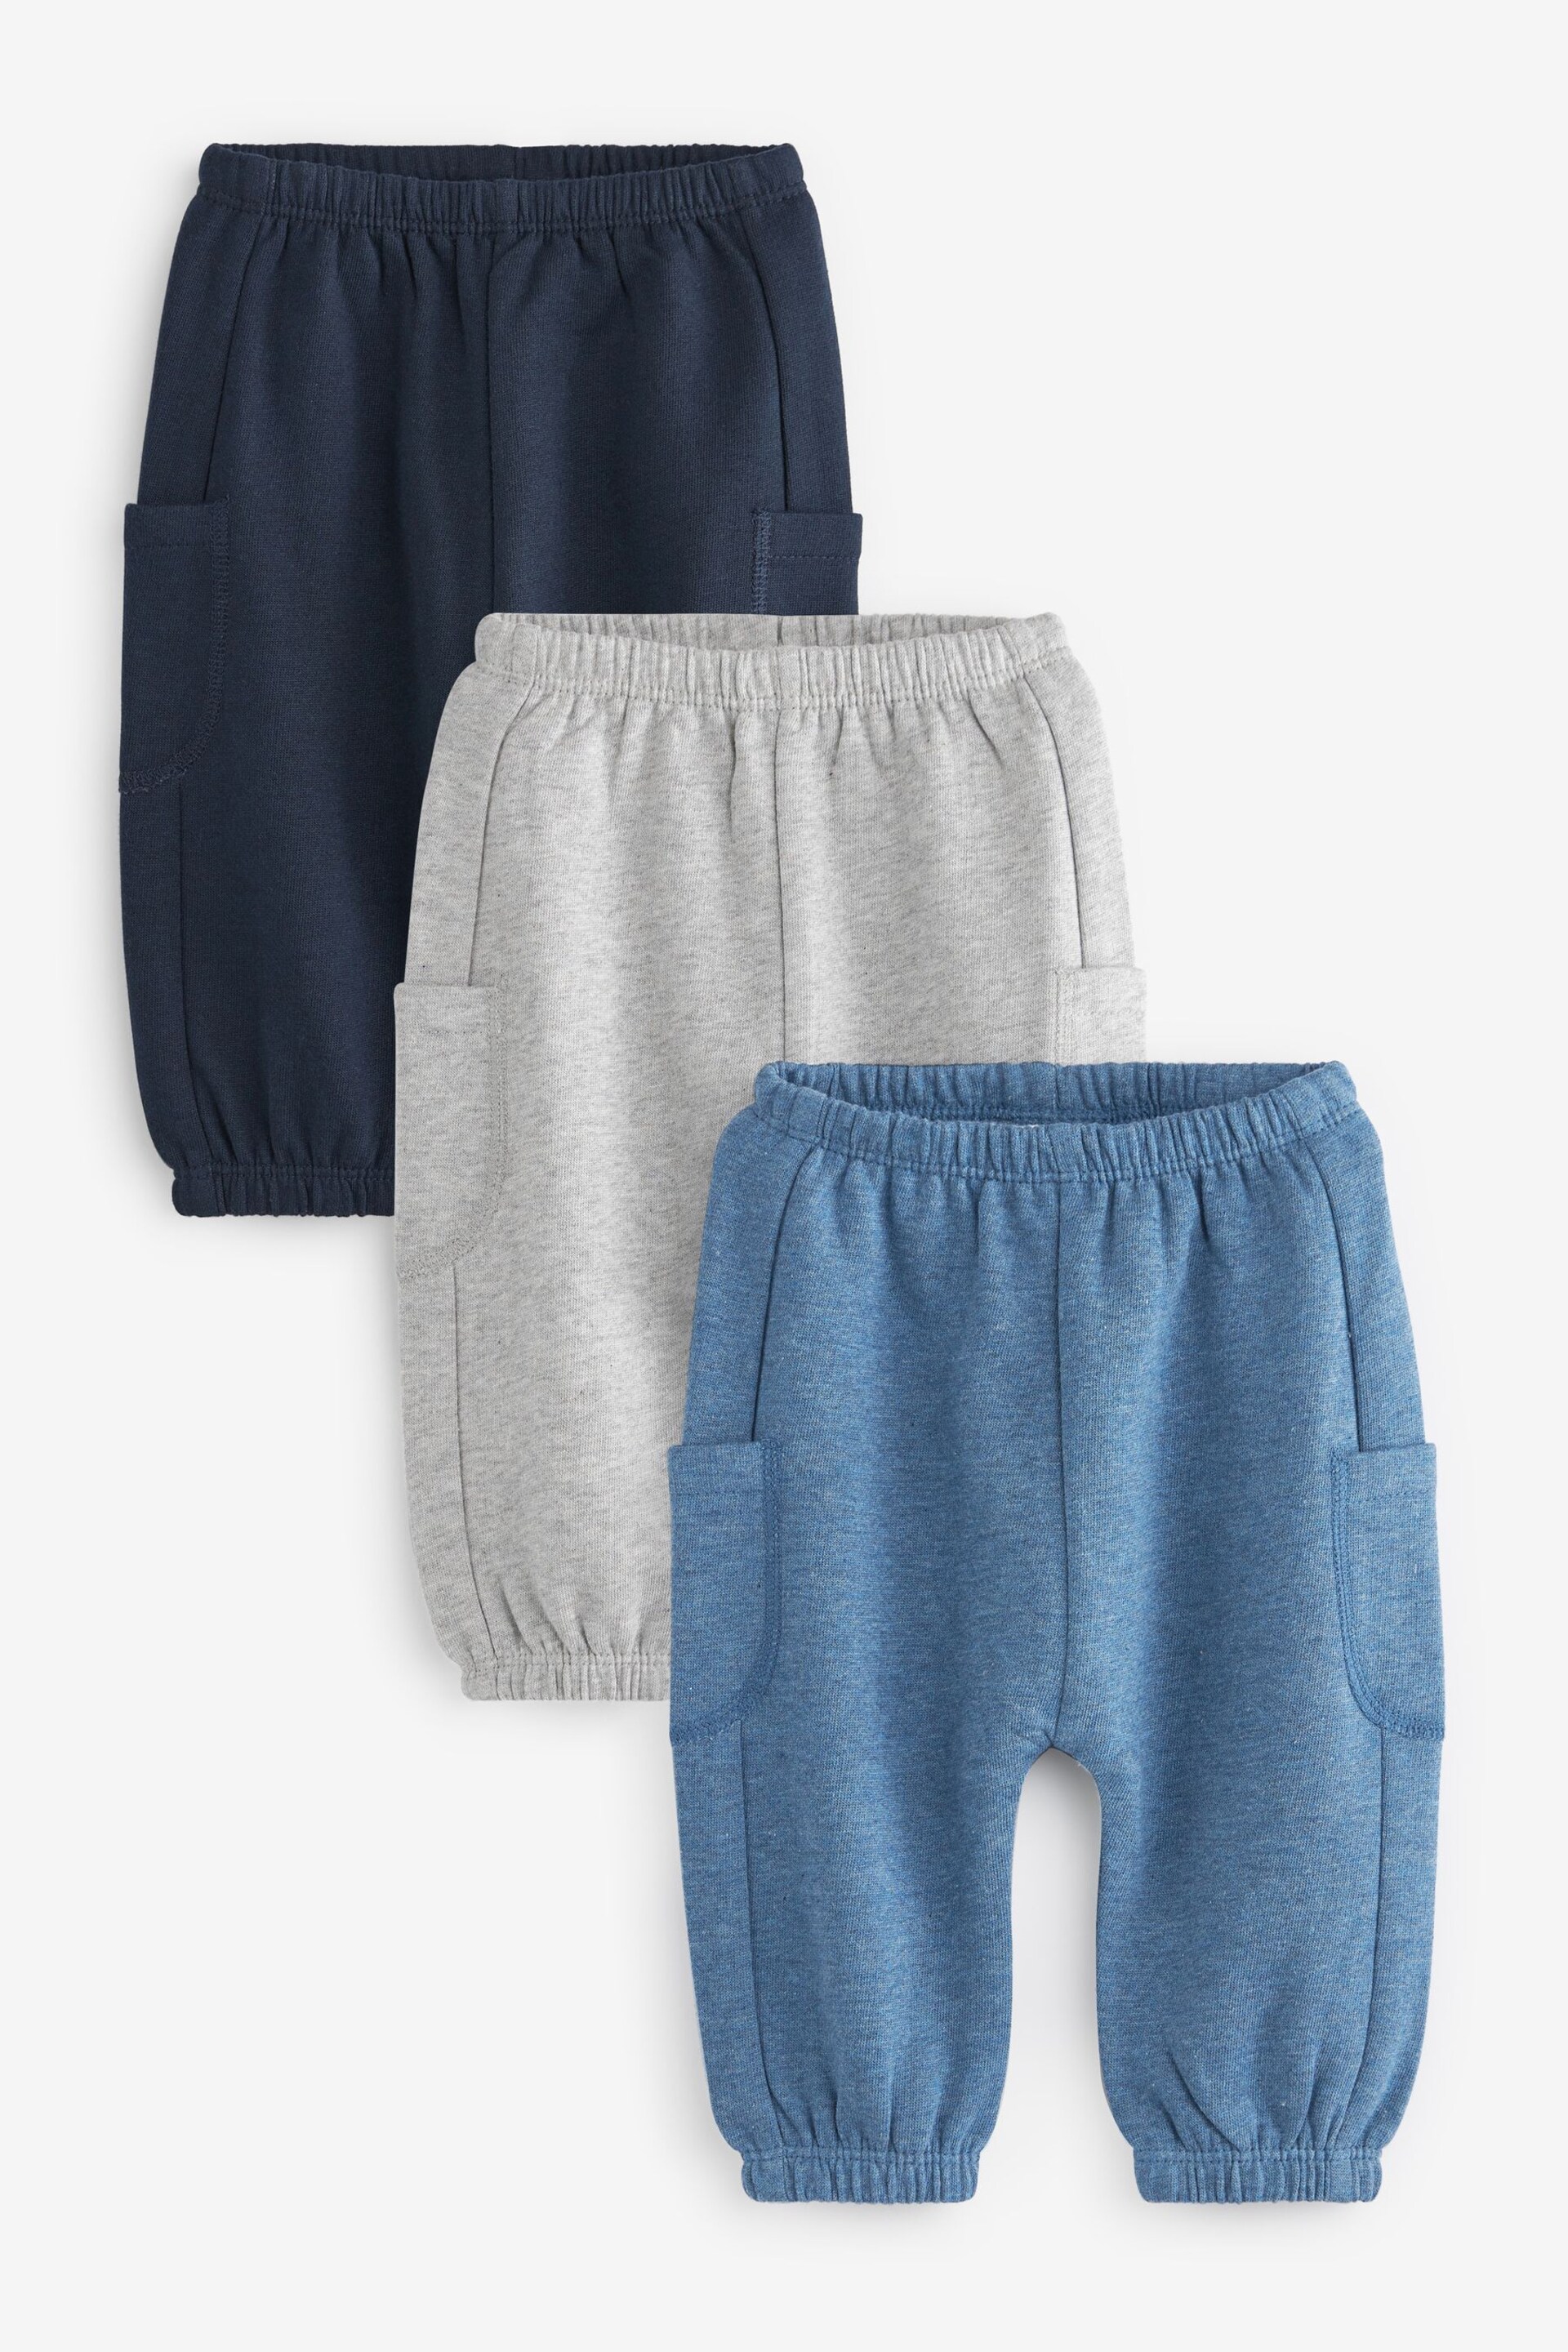 Blue/Grey Joggers 3 Pack (0mths-2yrs) - Image 1 of 2